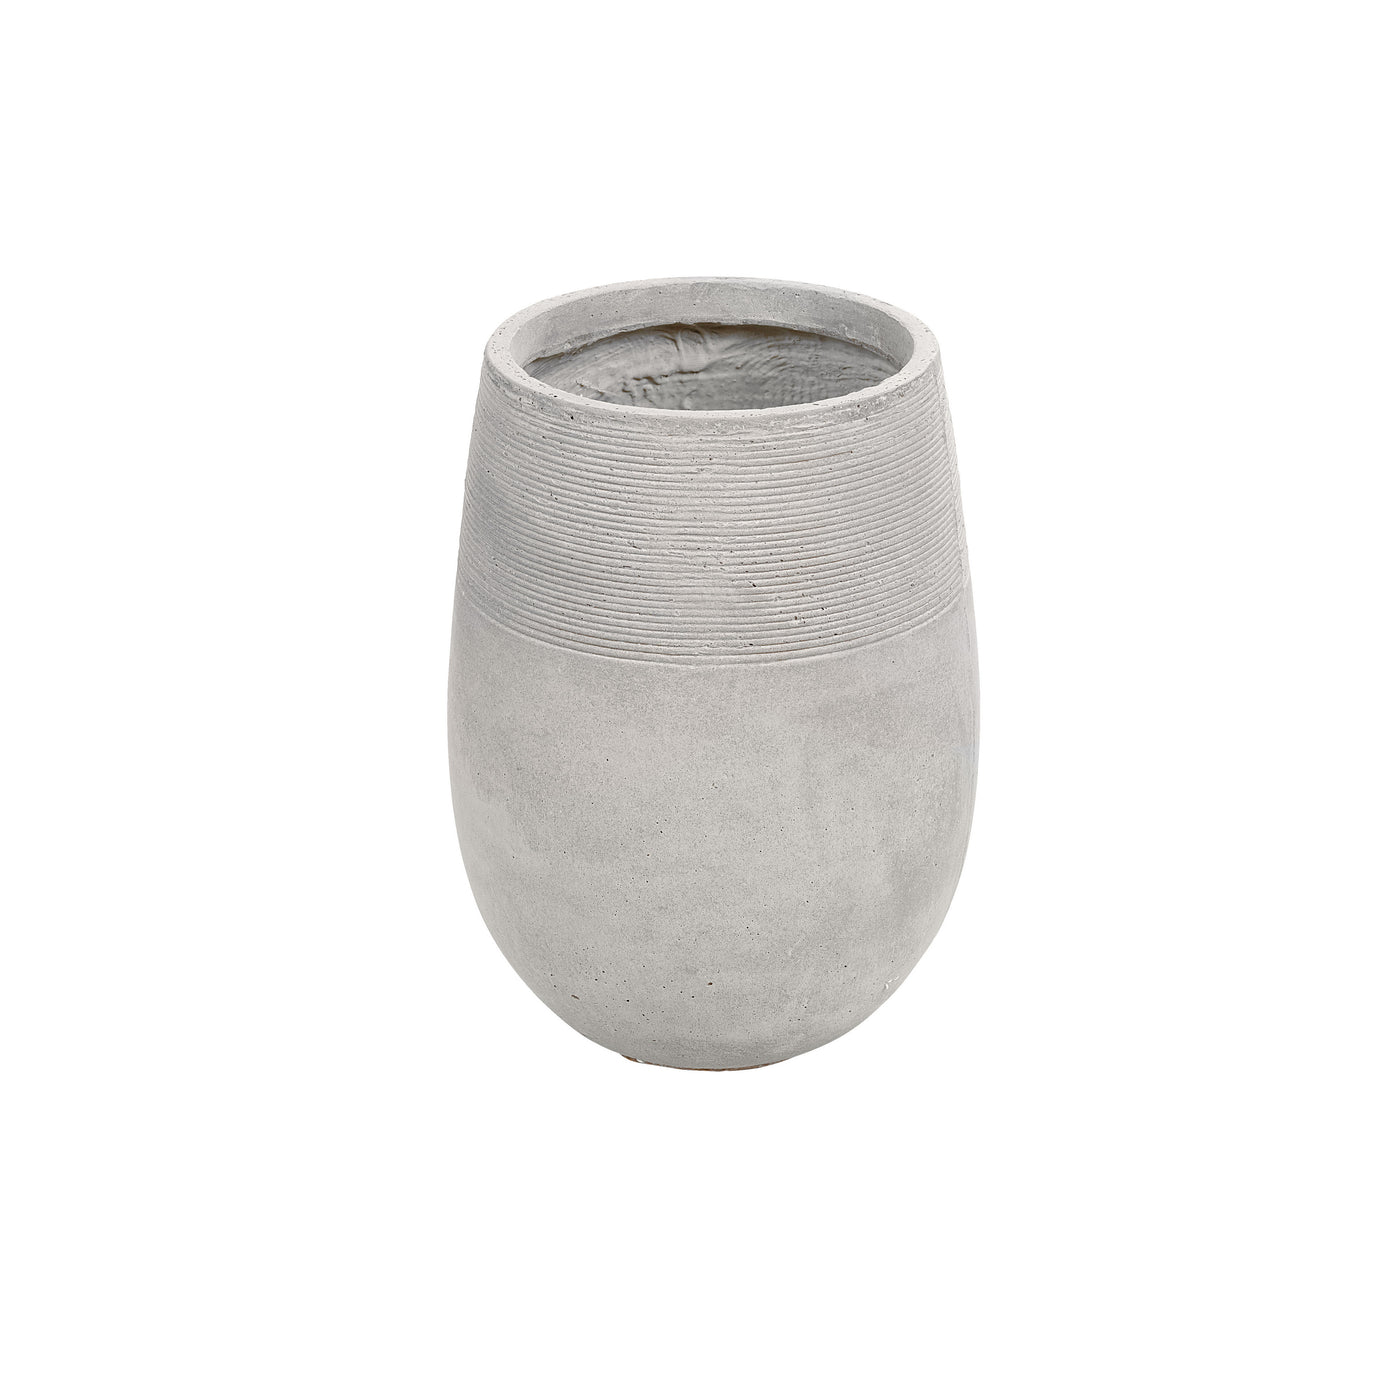 Contemporary tall stonecast planter in light grey